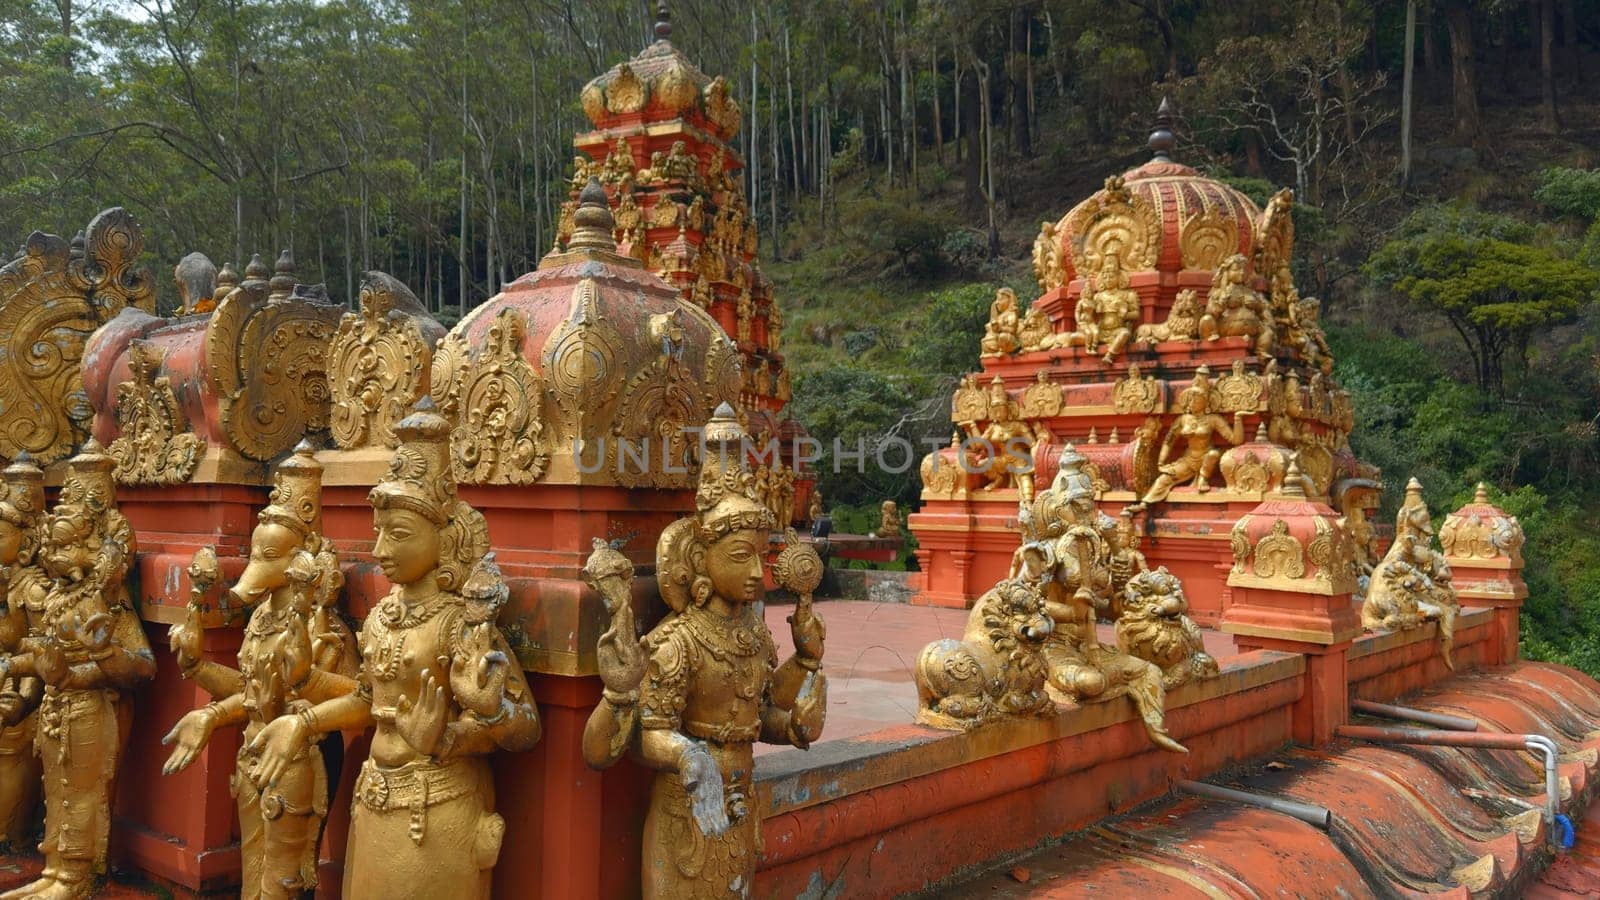 Hindu temple with golden statues. Action. Red temple with golden Buddhist statues. Temple of Hindu origin in Sri Lanka by Mediawhalestock